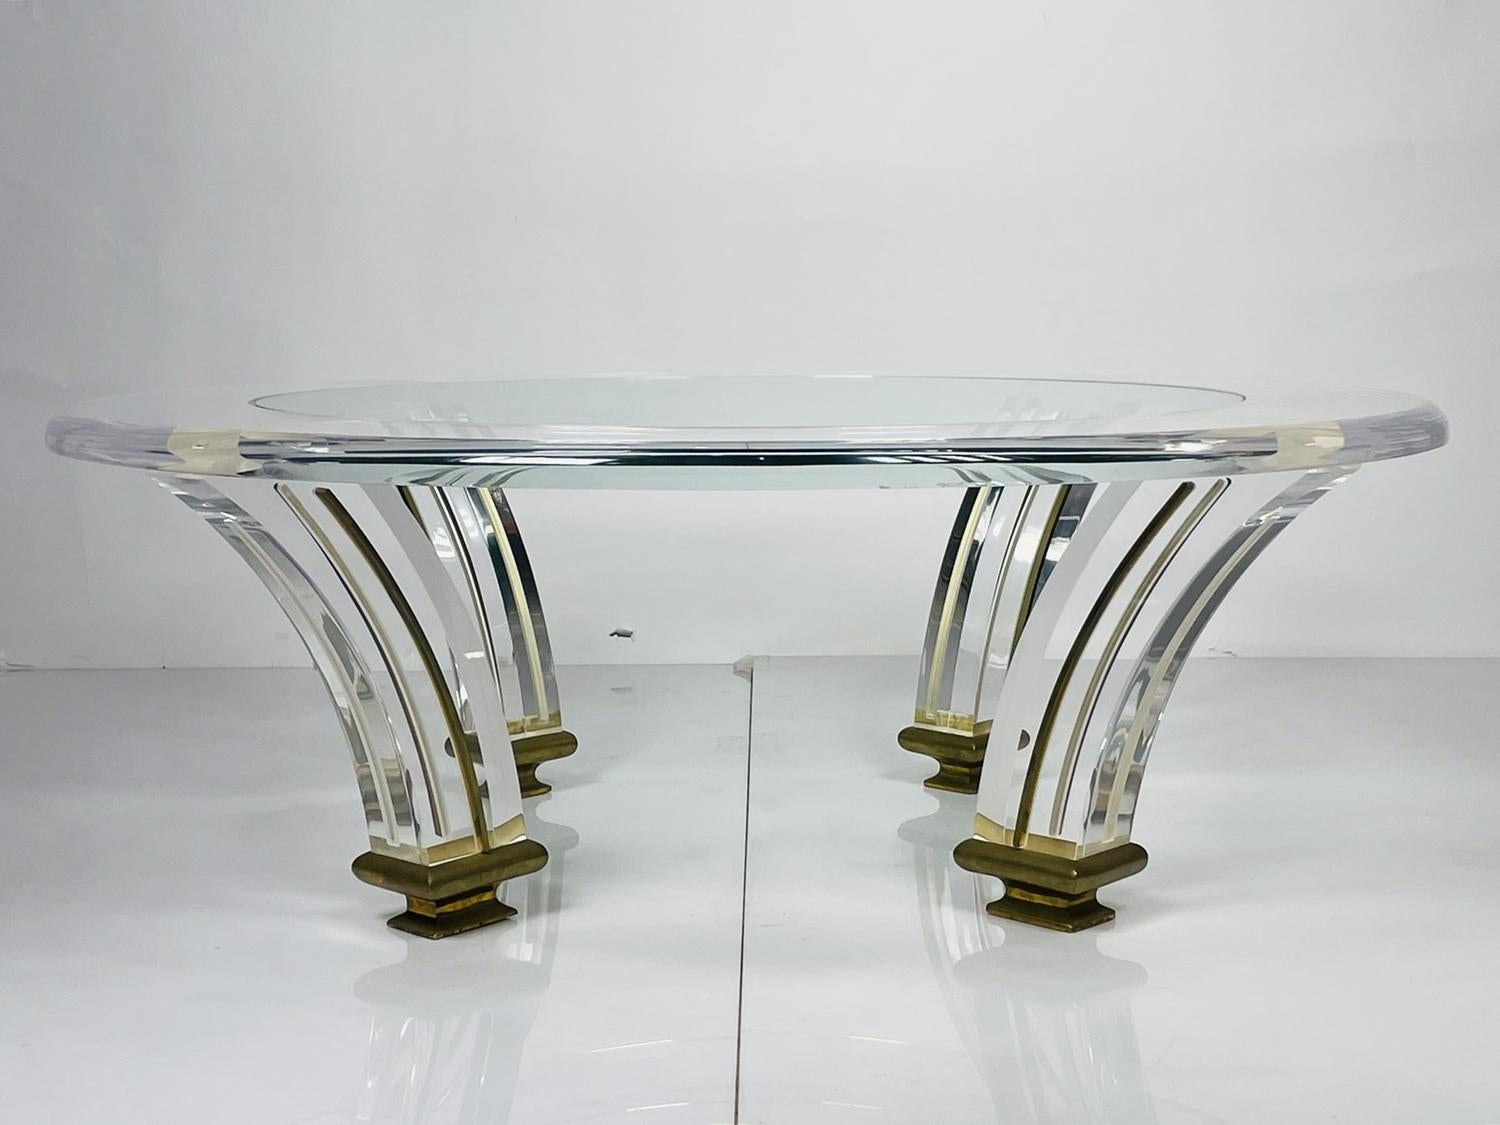 Vintage coffee table executed in Lucite, brass and glass.
The base has a splayed tusk shaped legs with brass detail running up the legs and solid brass rounded caps at the bottom of the legs.
The top is made of a a thick Lucite with bullnose edge